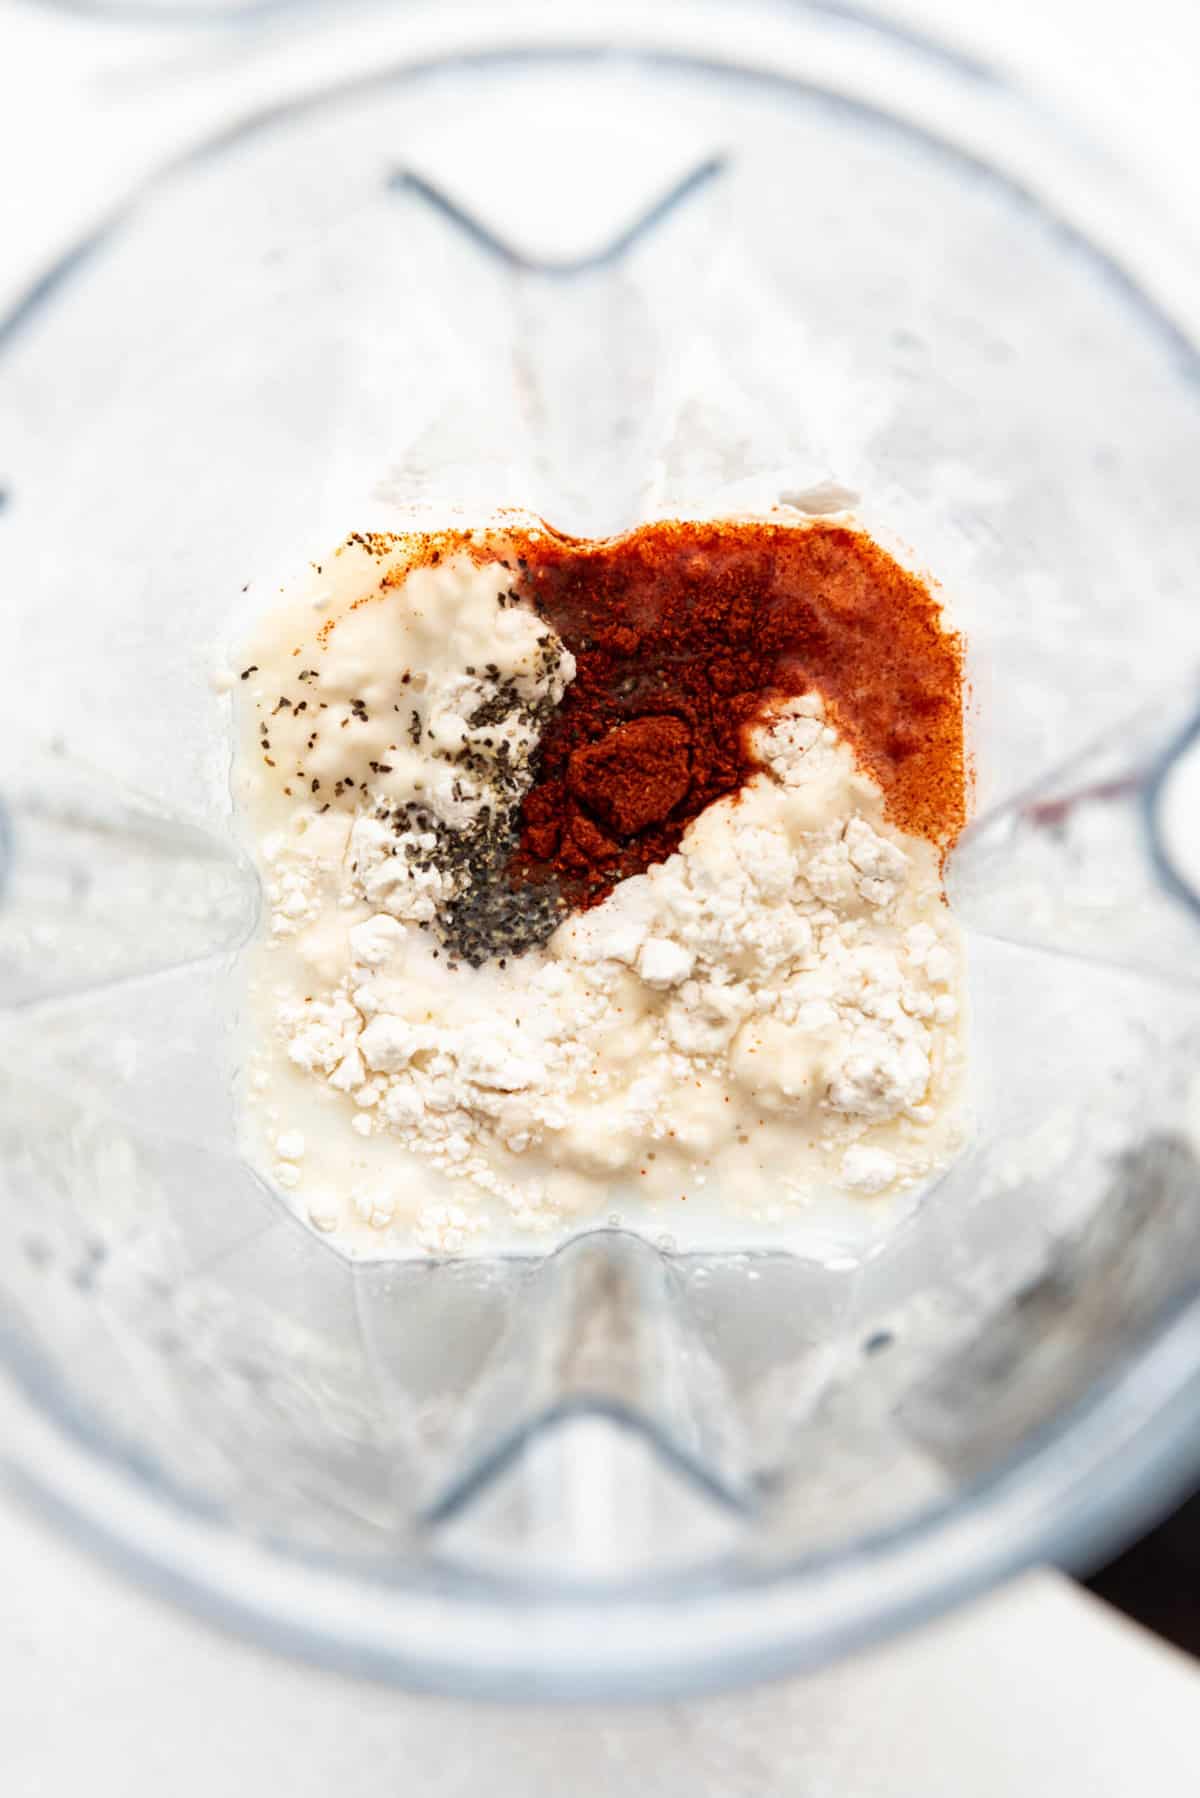 Combining eggs, milk, flour, and spices in a blender.